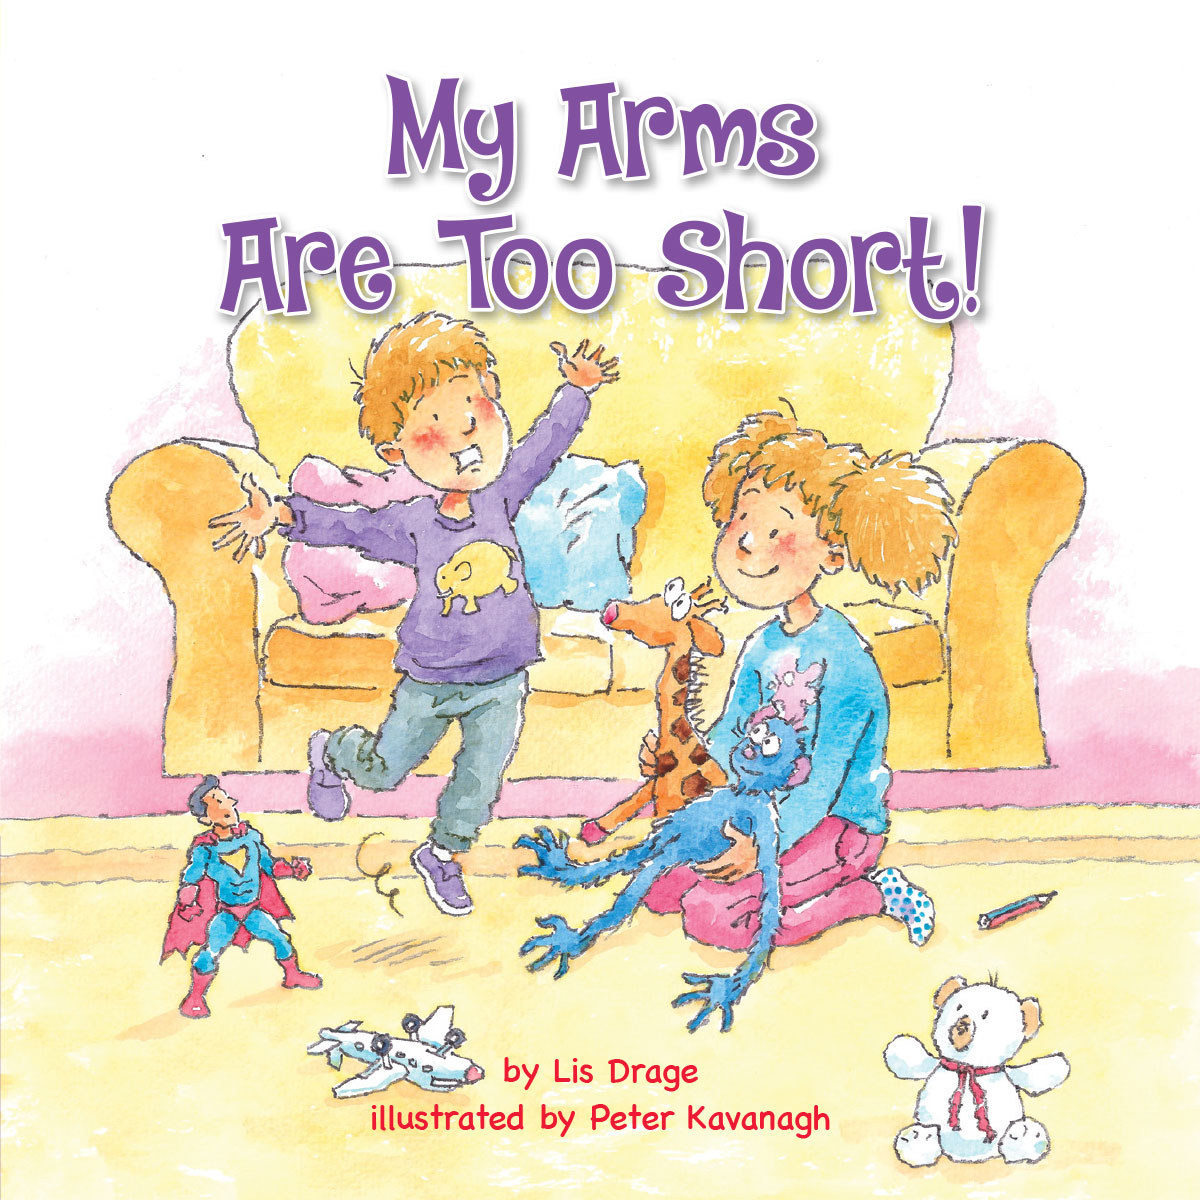 My Arms Are Too Short! Book Cover by Lis Drage